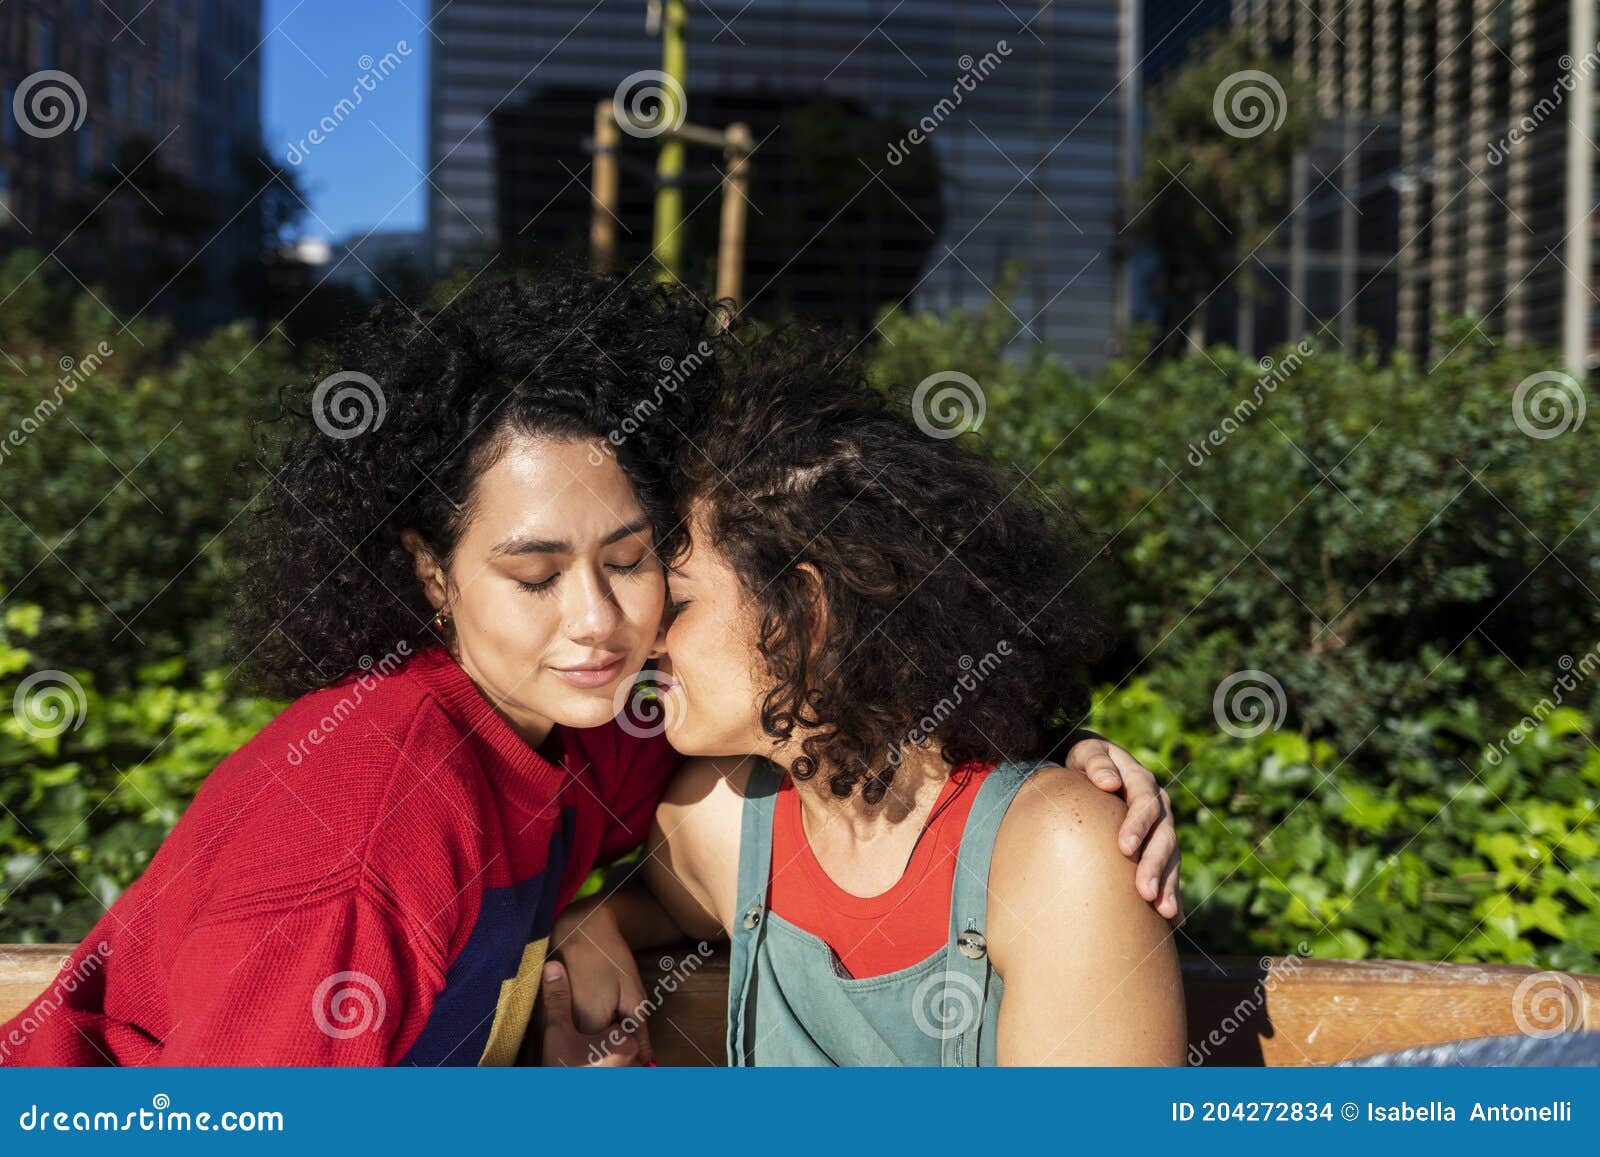 Smiling Lesbian Couple Embracing and Relaxing on a Park Bench Stock